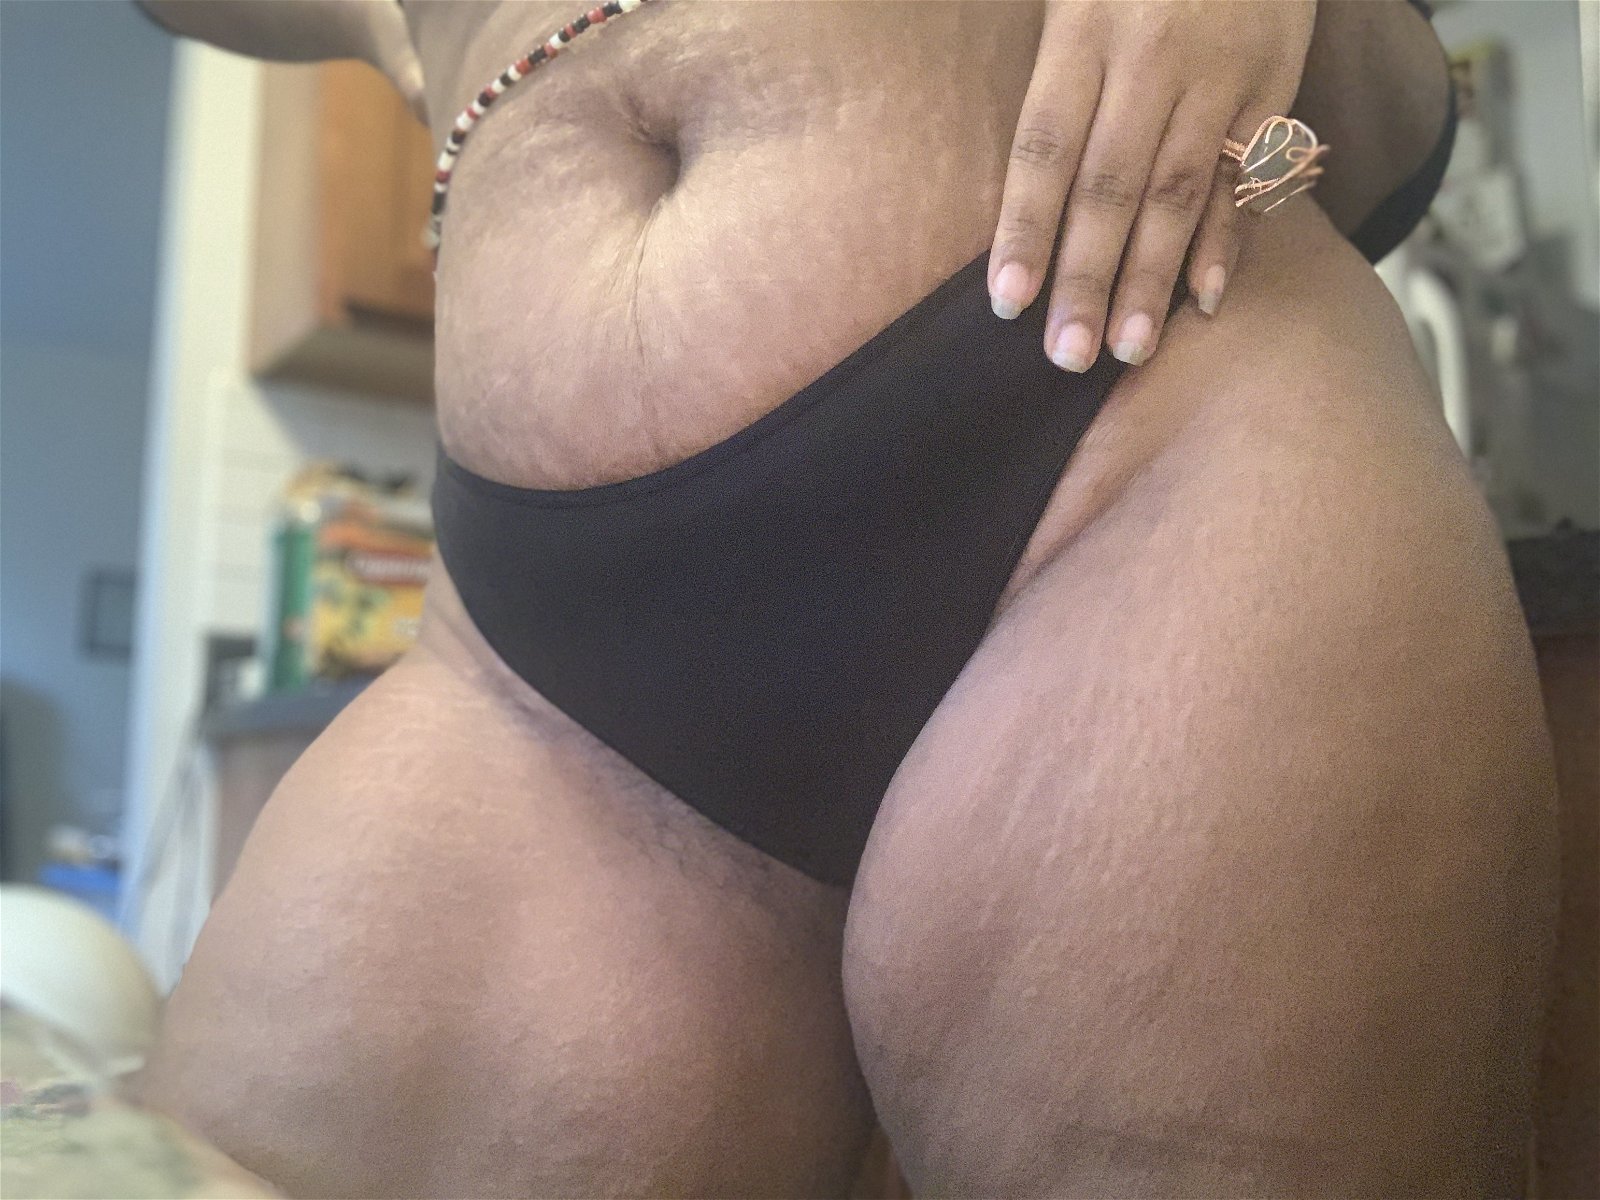 Photo by Jade baby with the username @findommegodjade, who is a star user,  April 28, 2020 at 12:30 AM. The post is about the topic MILF and the text says 'Ive heard Thick Thigh Savea Lives🧐
can I save yours 😘'